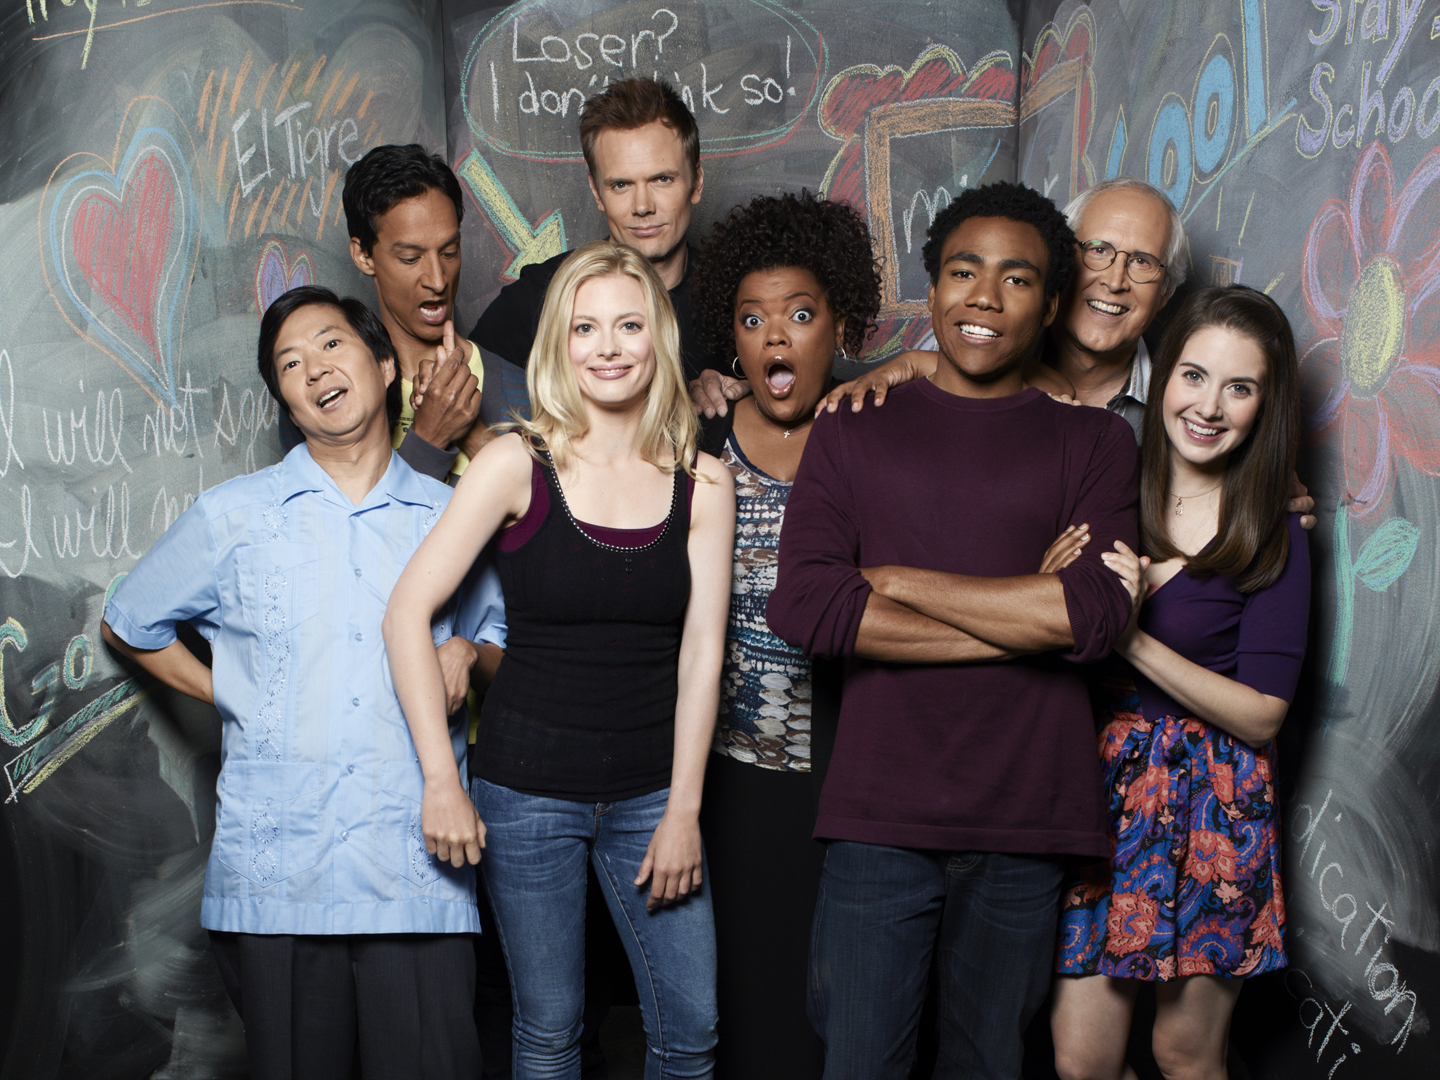 Reflections on Probably The Final Episode of Community